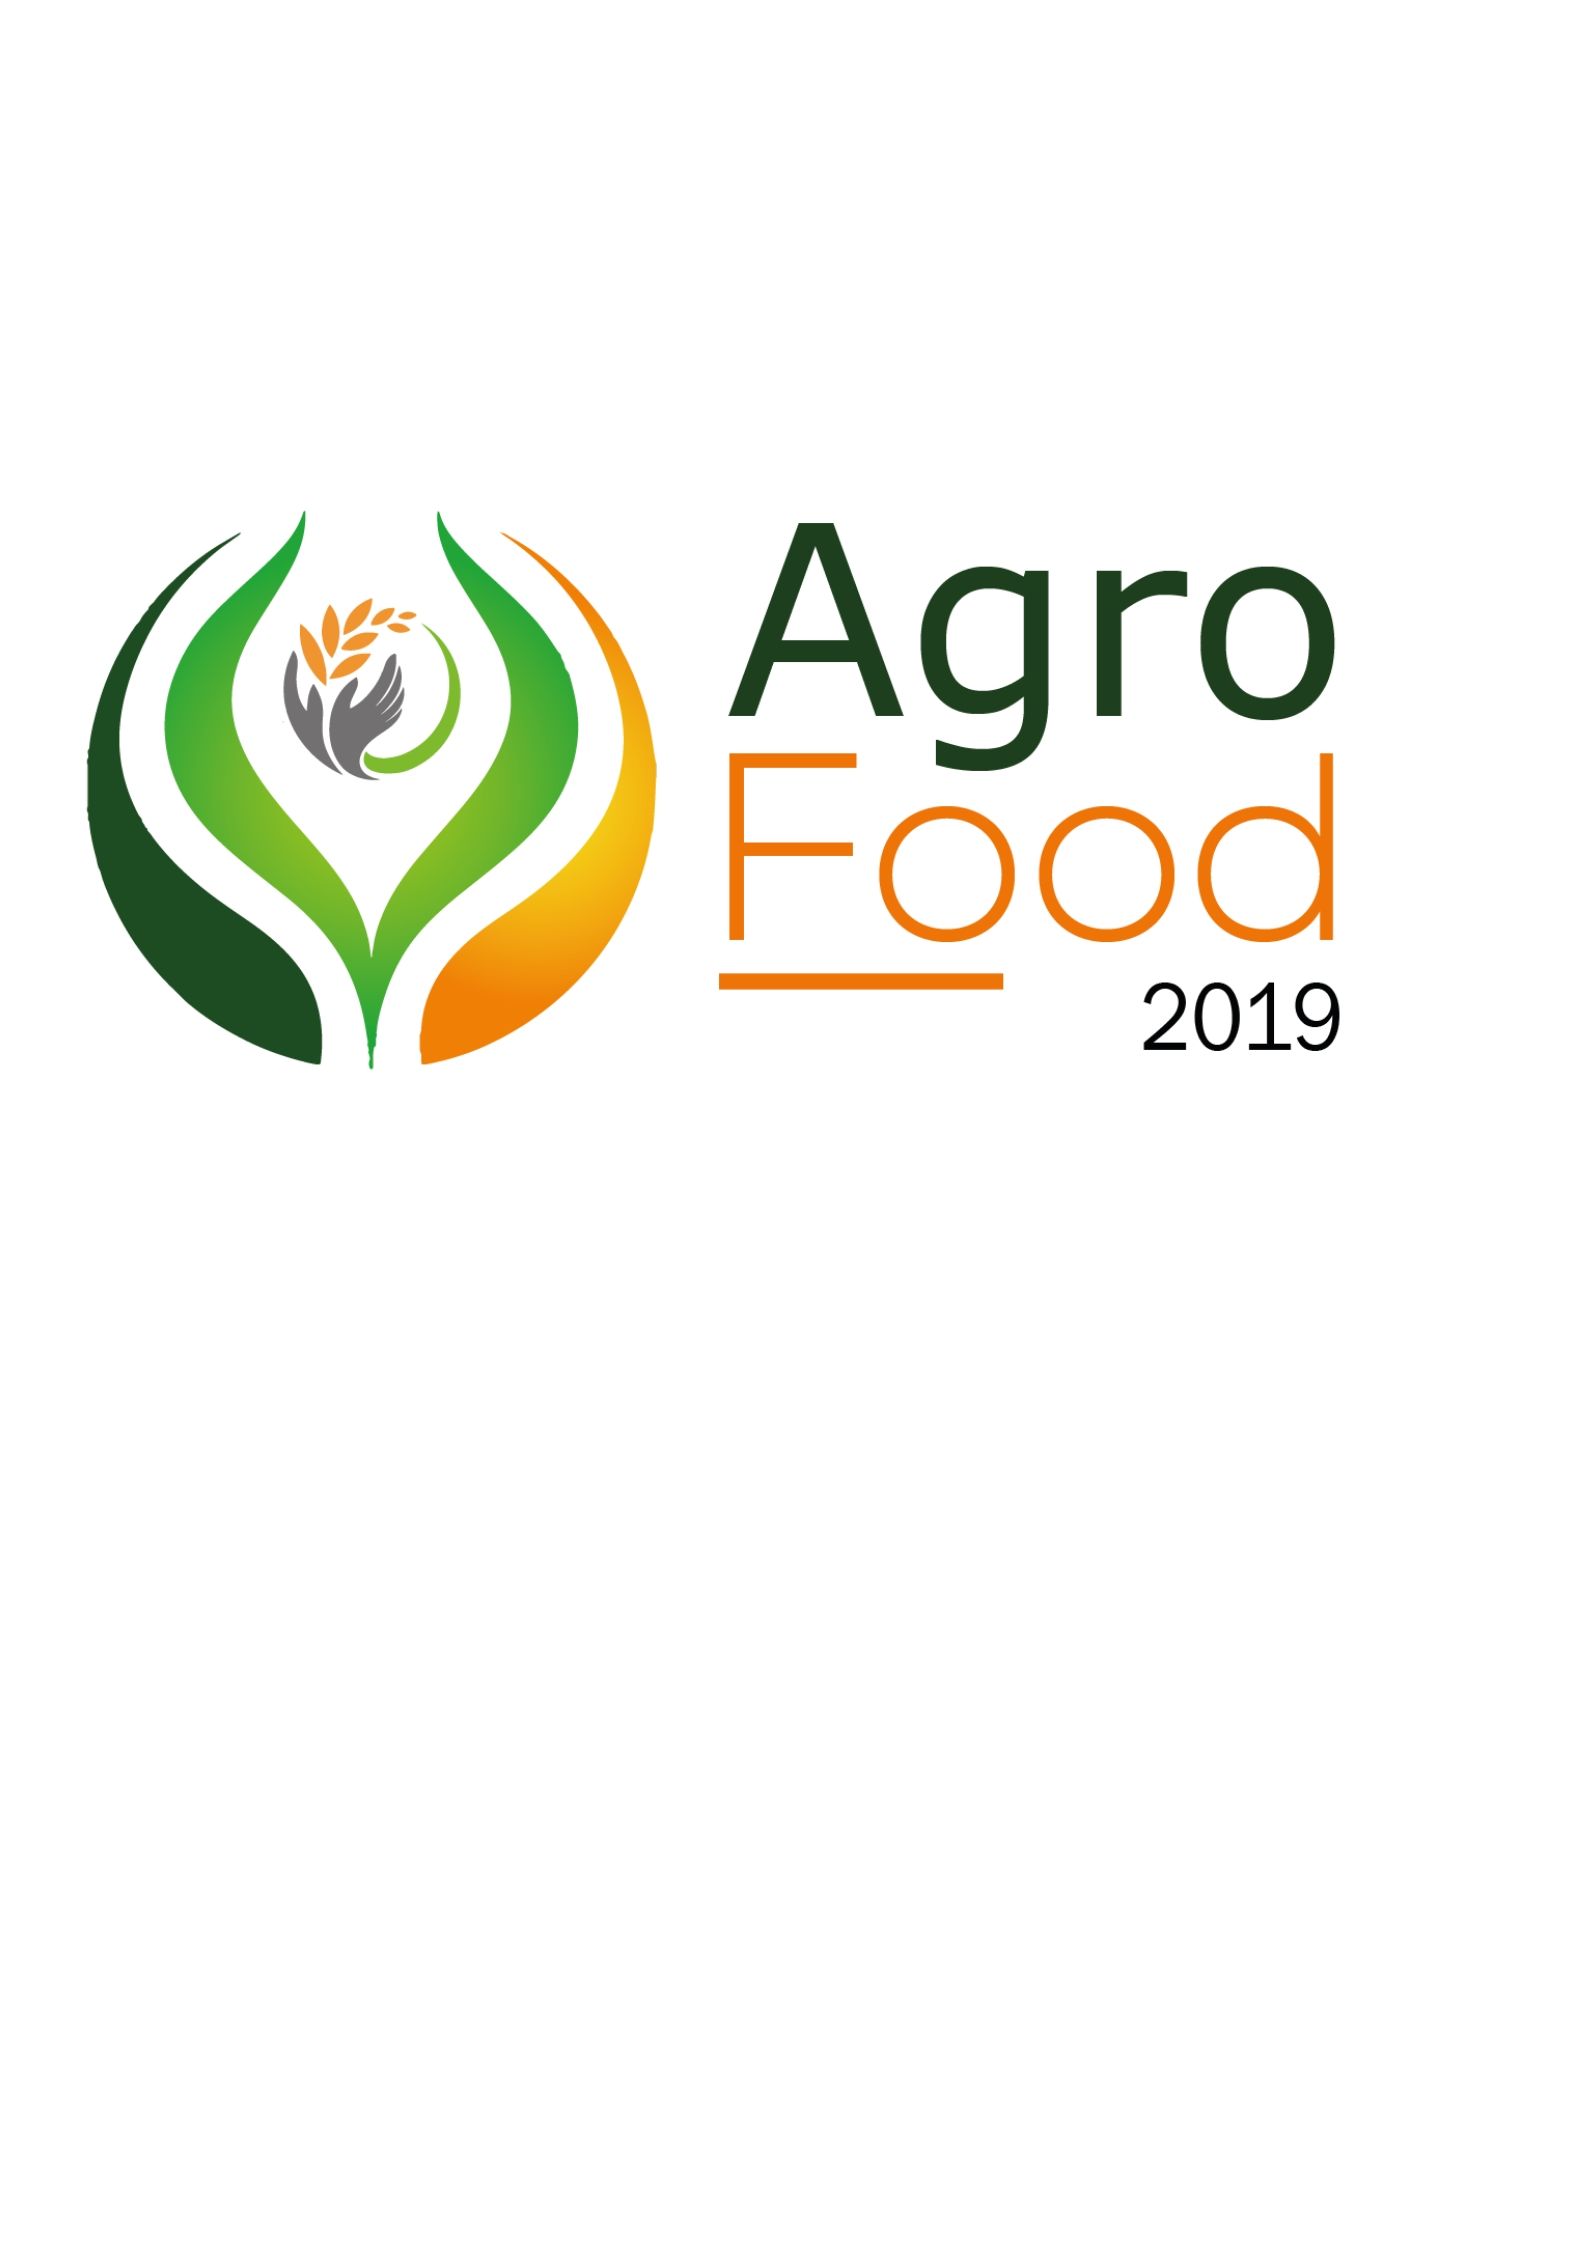 International Conference on Agriculture, Food Security and Safety (AgroFood 2019), Colombo, Sri Lanka